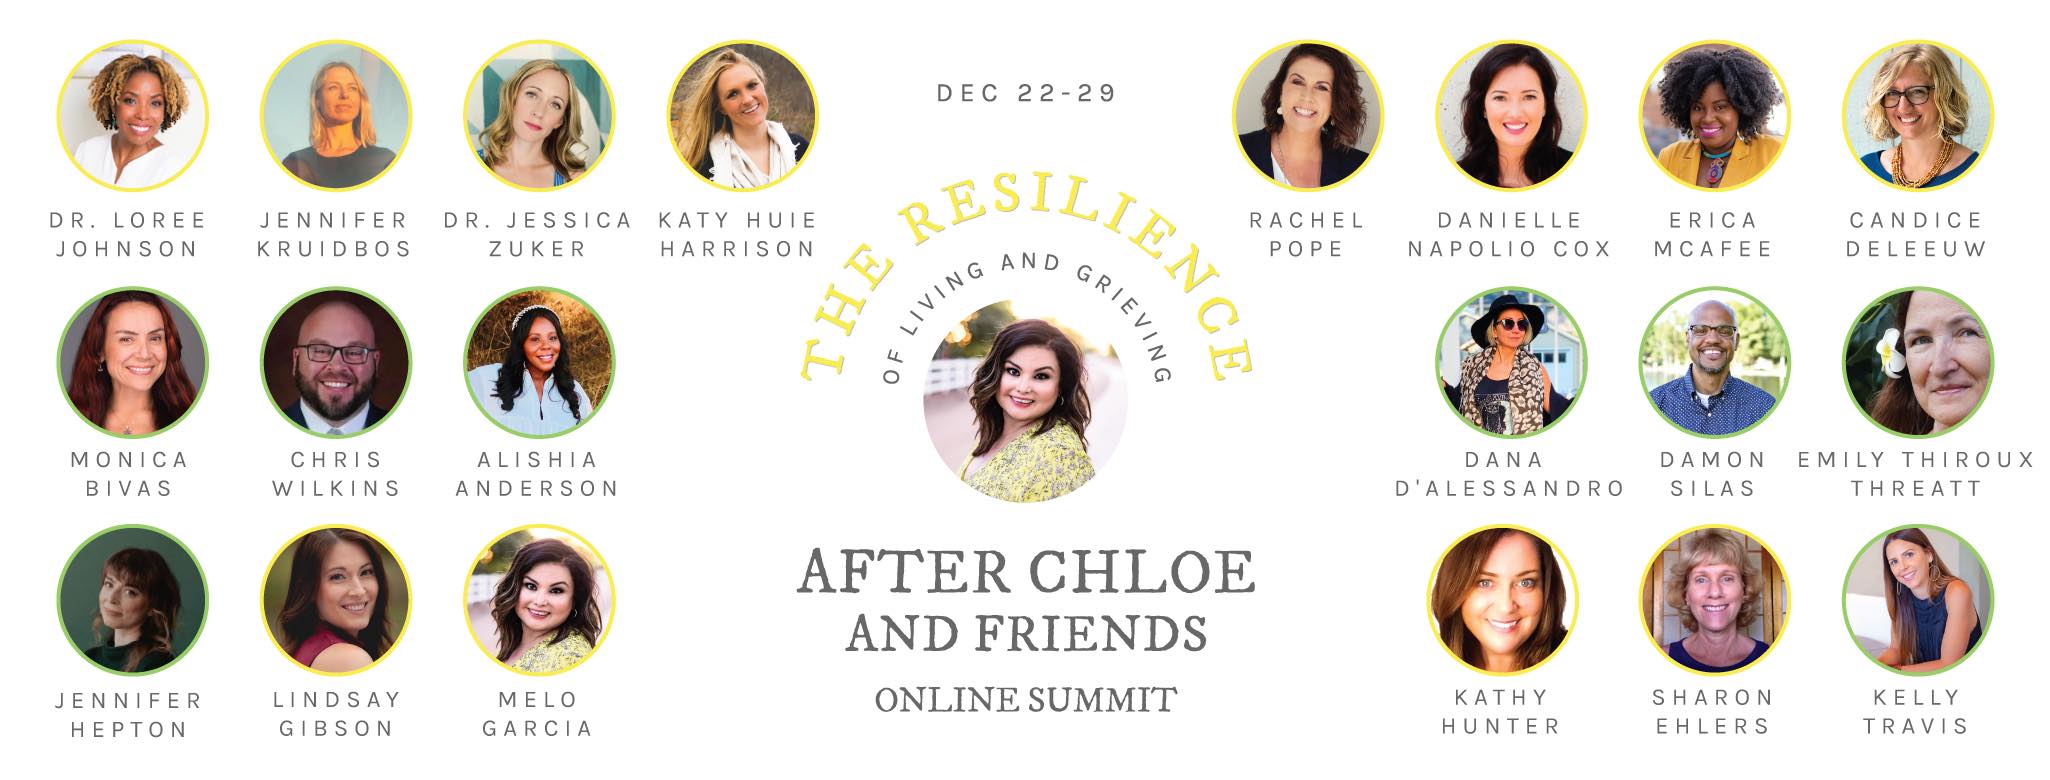 After Chloe and Friends Online Summit: The Resilience of Living and Grieving,